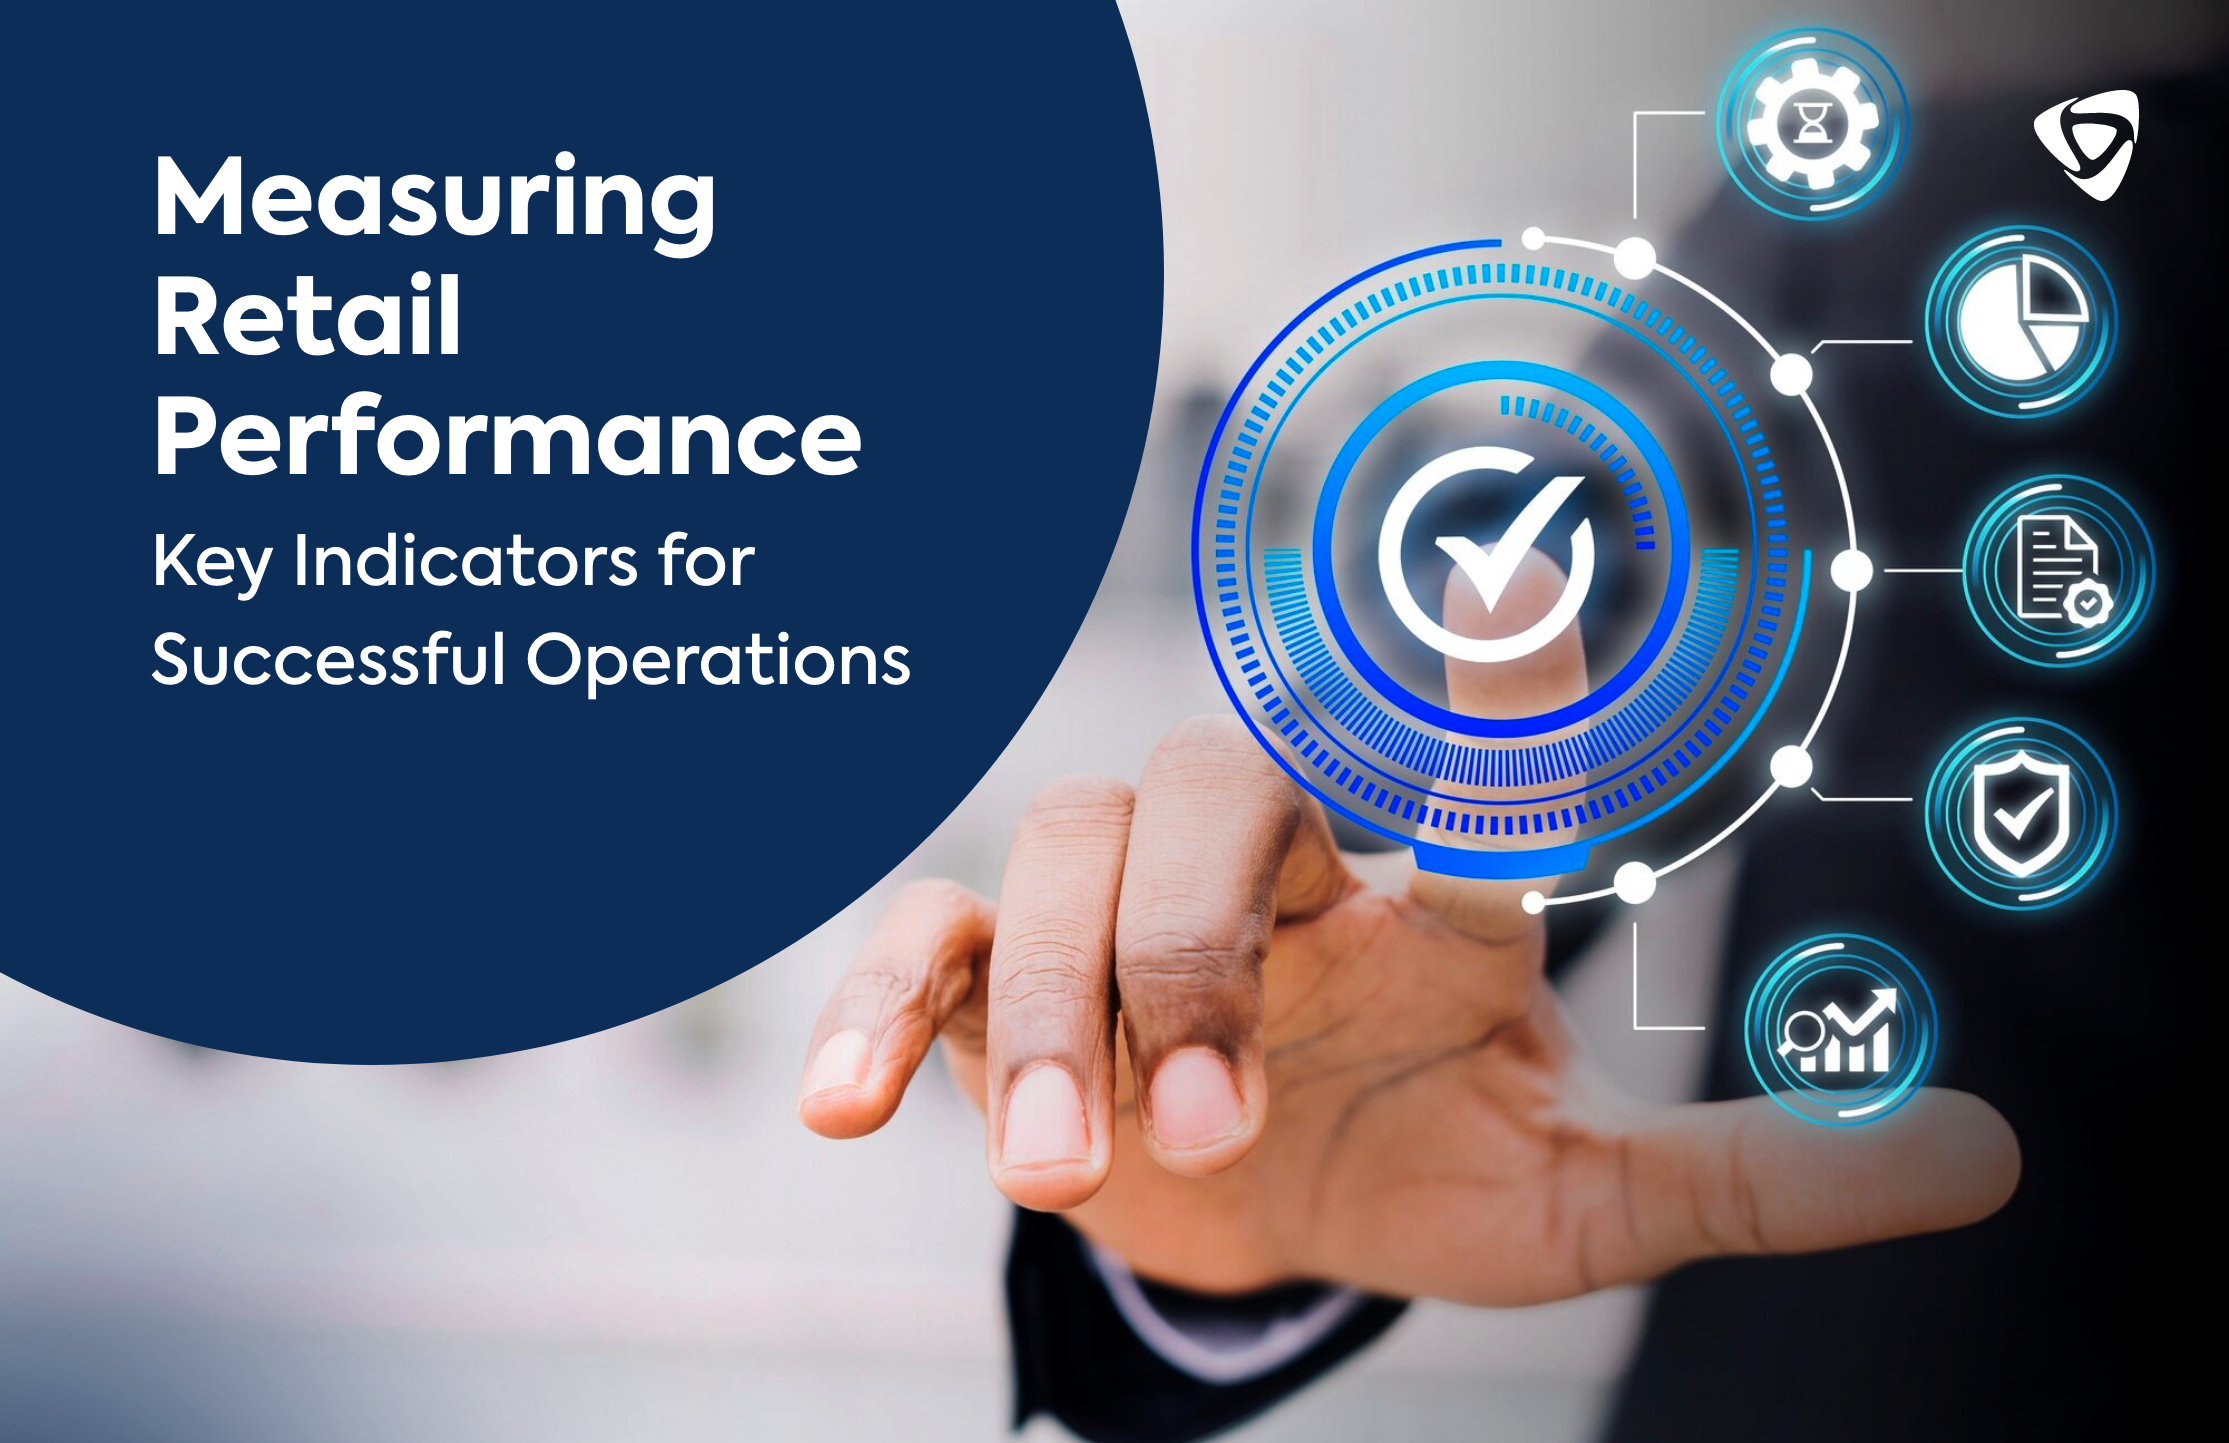 Measuring Retail Performance: Key Indicators for Successful Operations